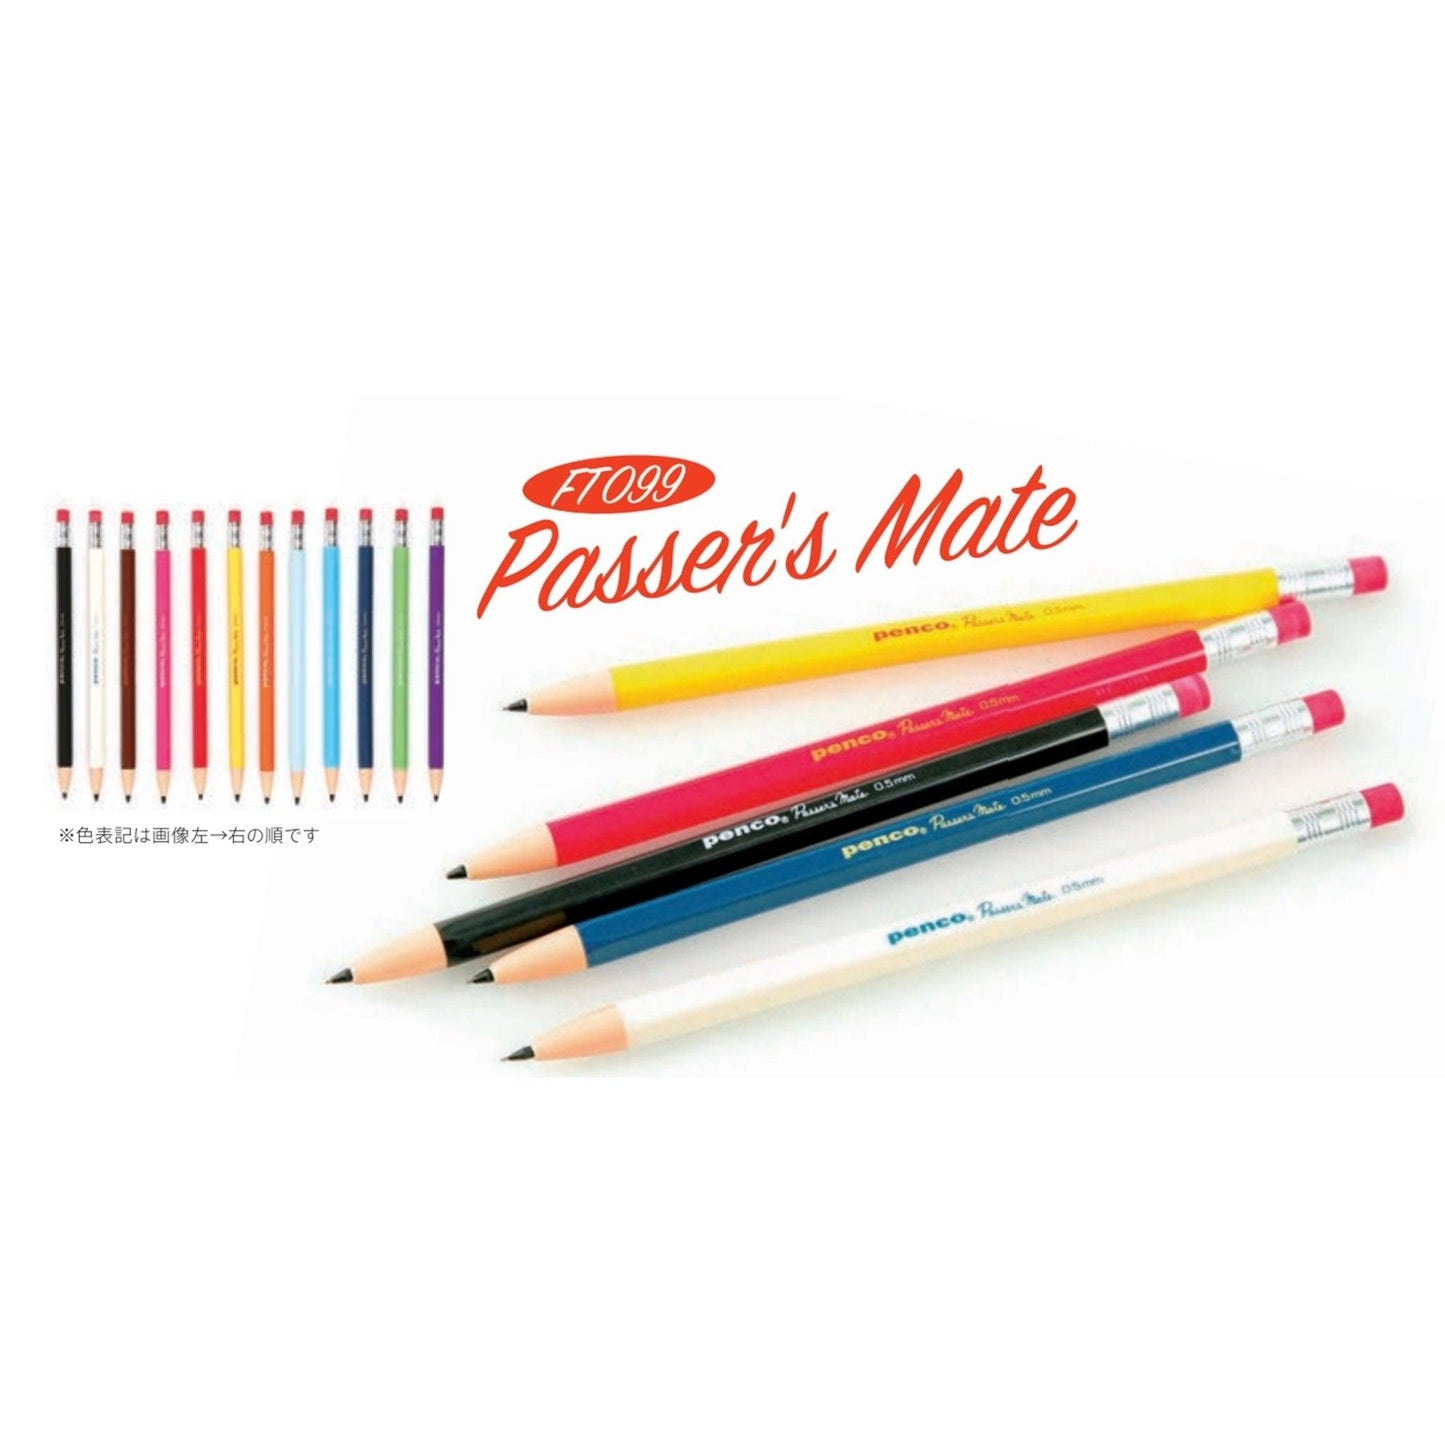 (Pre-Order) HIGHTIDE PENCO PASSERS MATE PENCIL Mechanical Pencil FT099 - CHL-STORE 